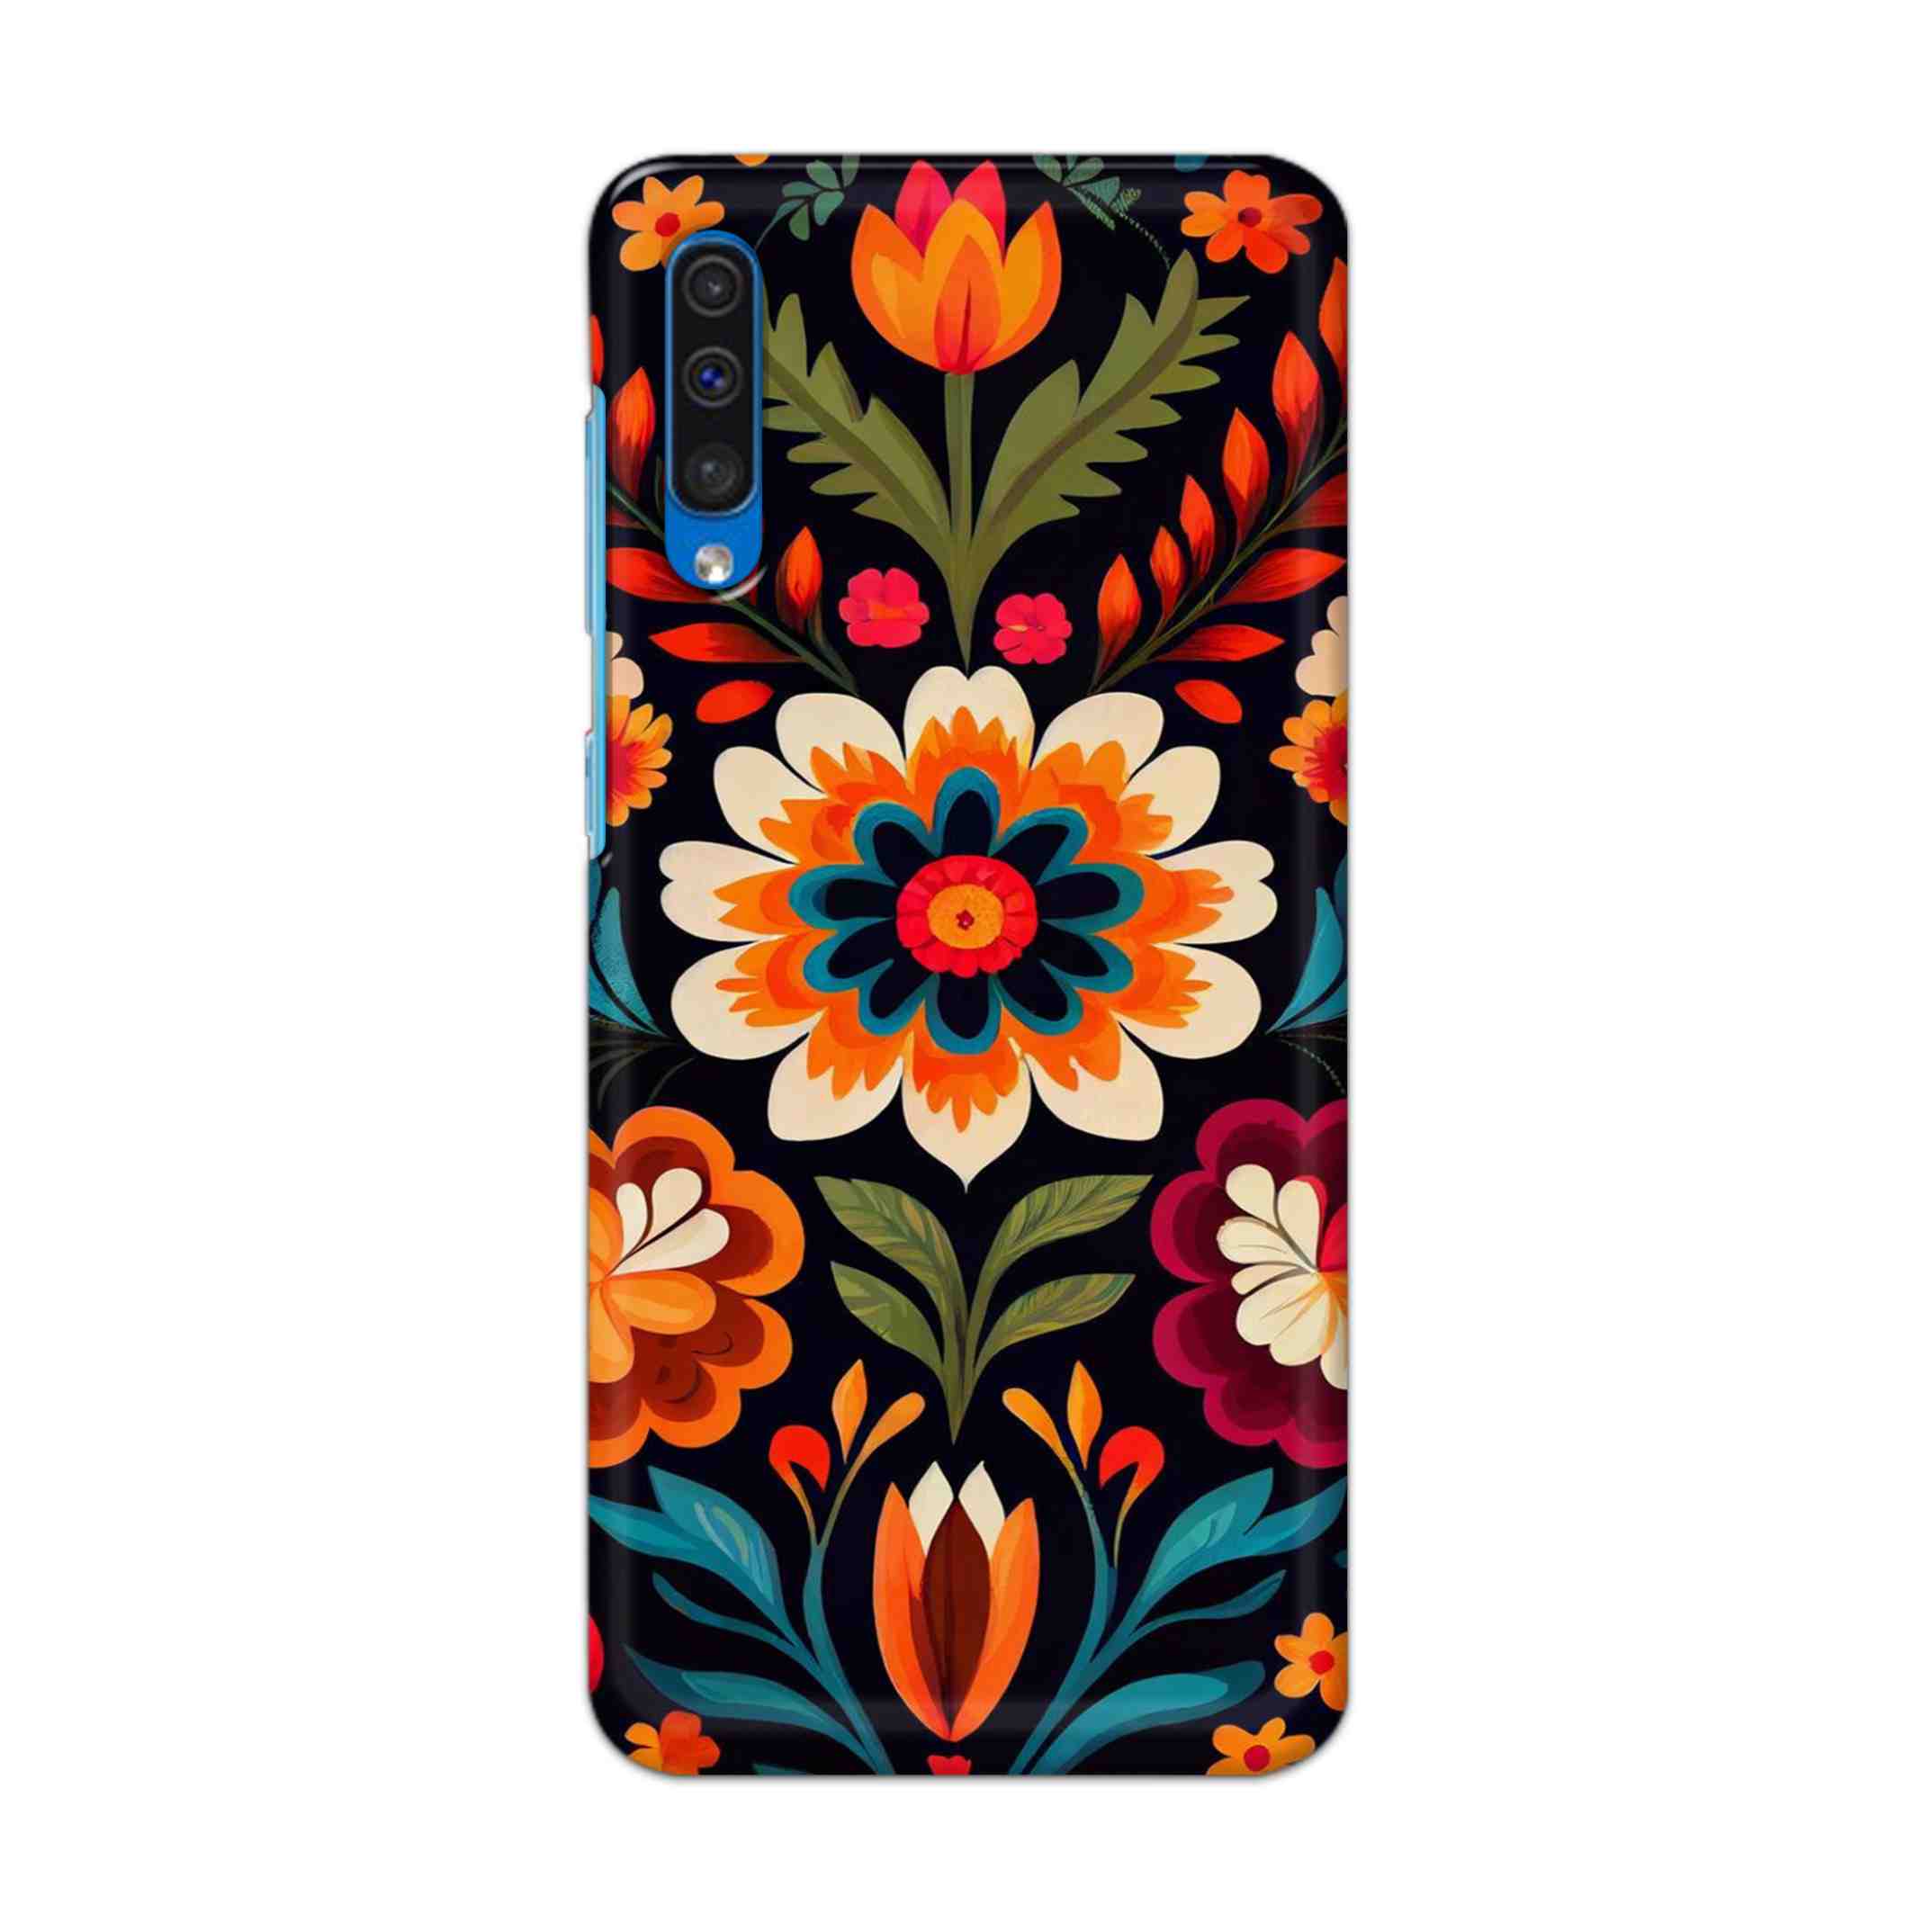 Buy Flower Hard Back Mobile Phone Case Cover For Samsung Galaxy A50 / A50s / A30s Online